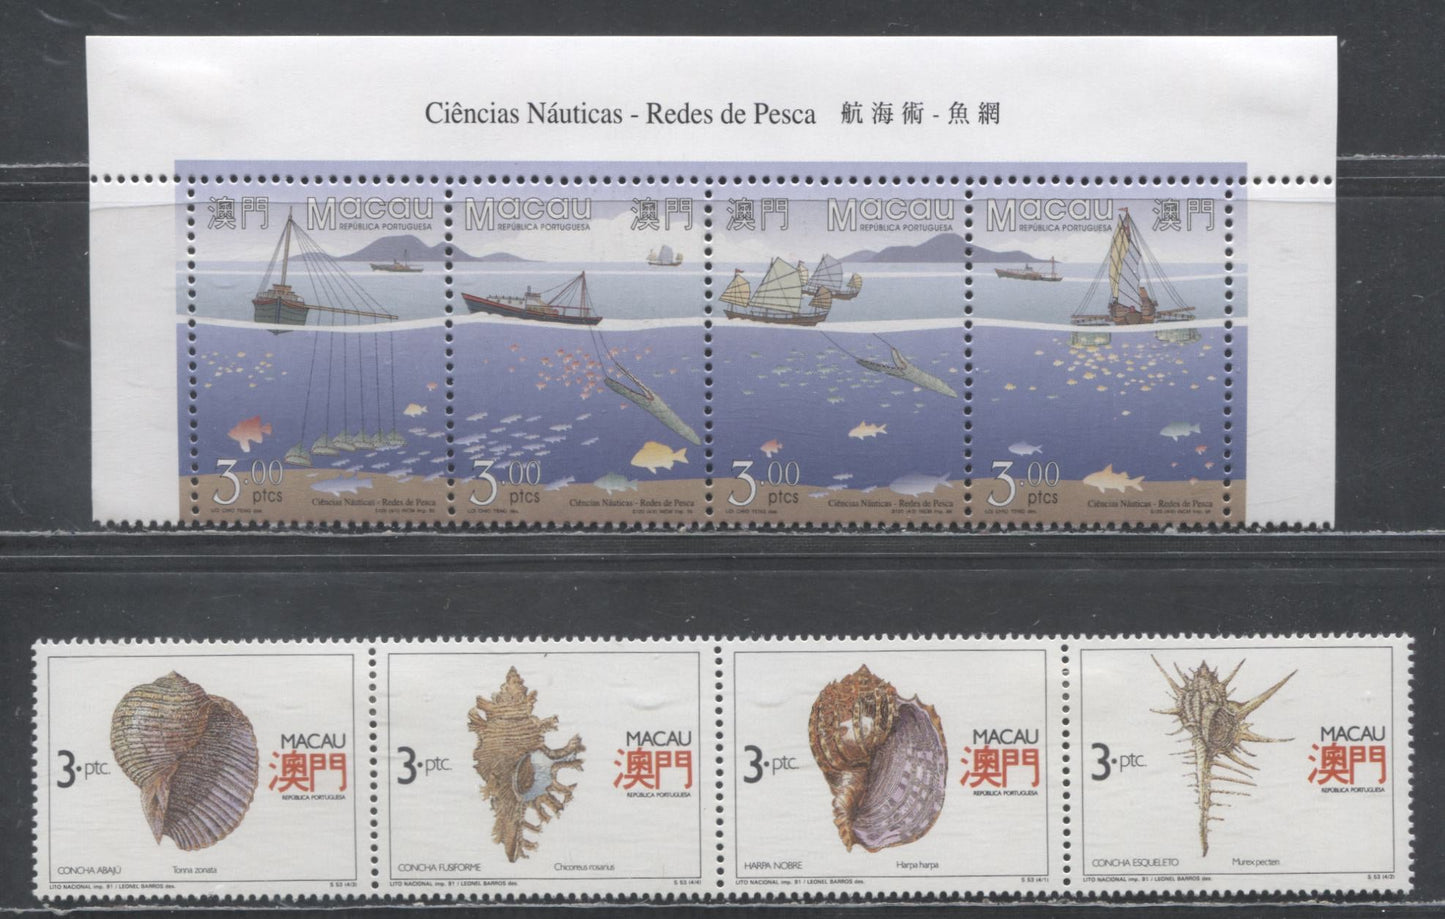 Lot 60 Macao SC#647a/841a 1991-1996 Shells - Fishing Boats Issues, 2 VFOG Strips Of 4, Click on Listing to See ALL Pictures, 2017 Scott Cat. $19.5